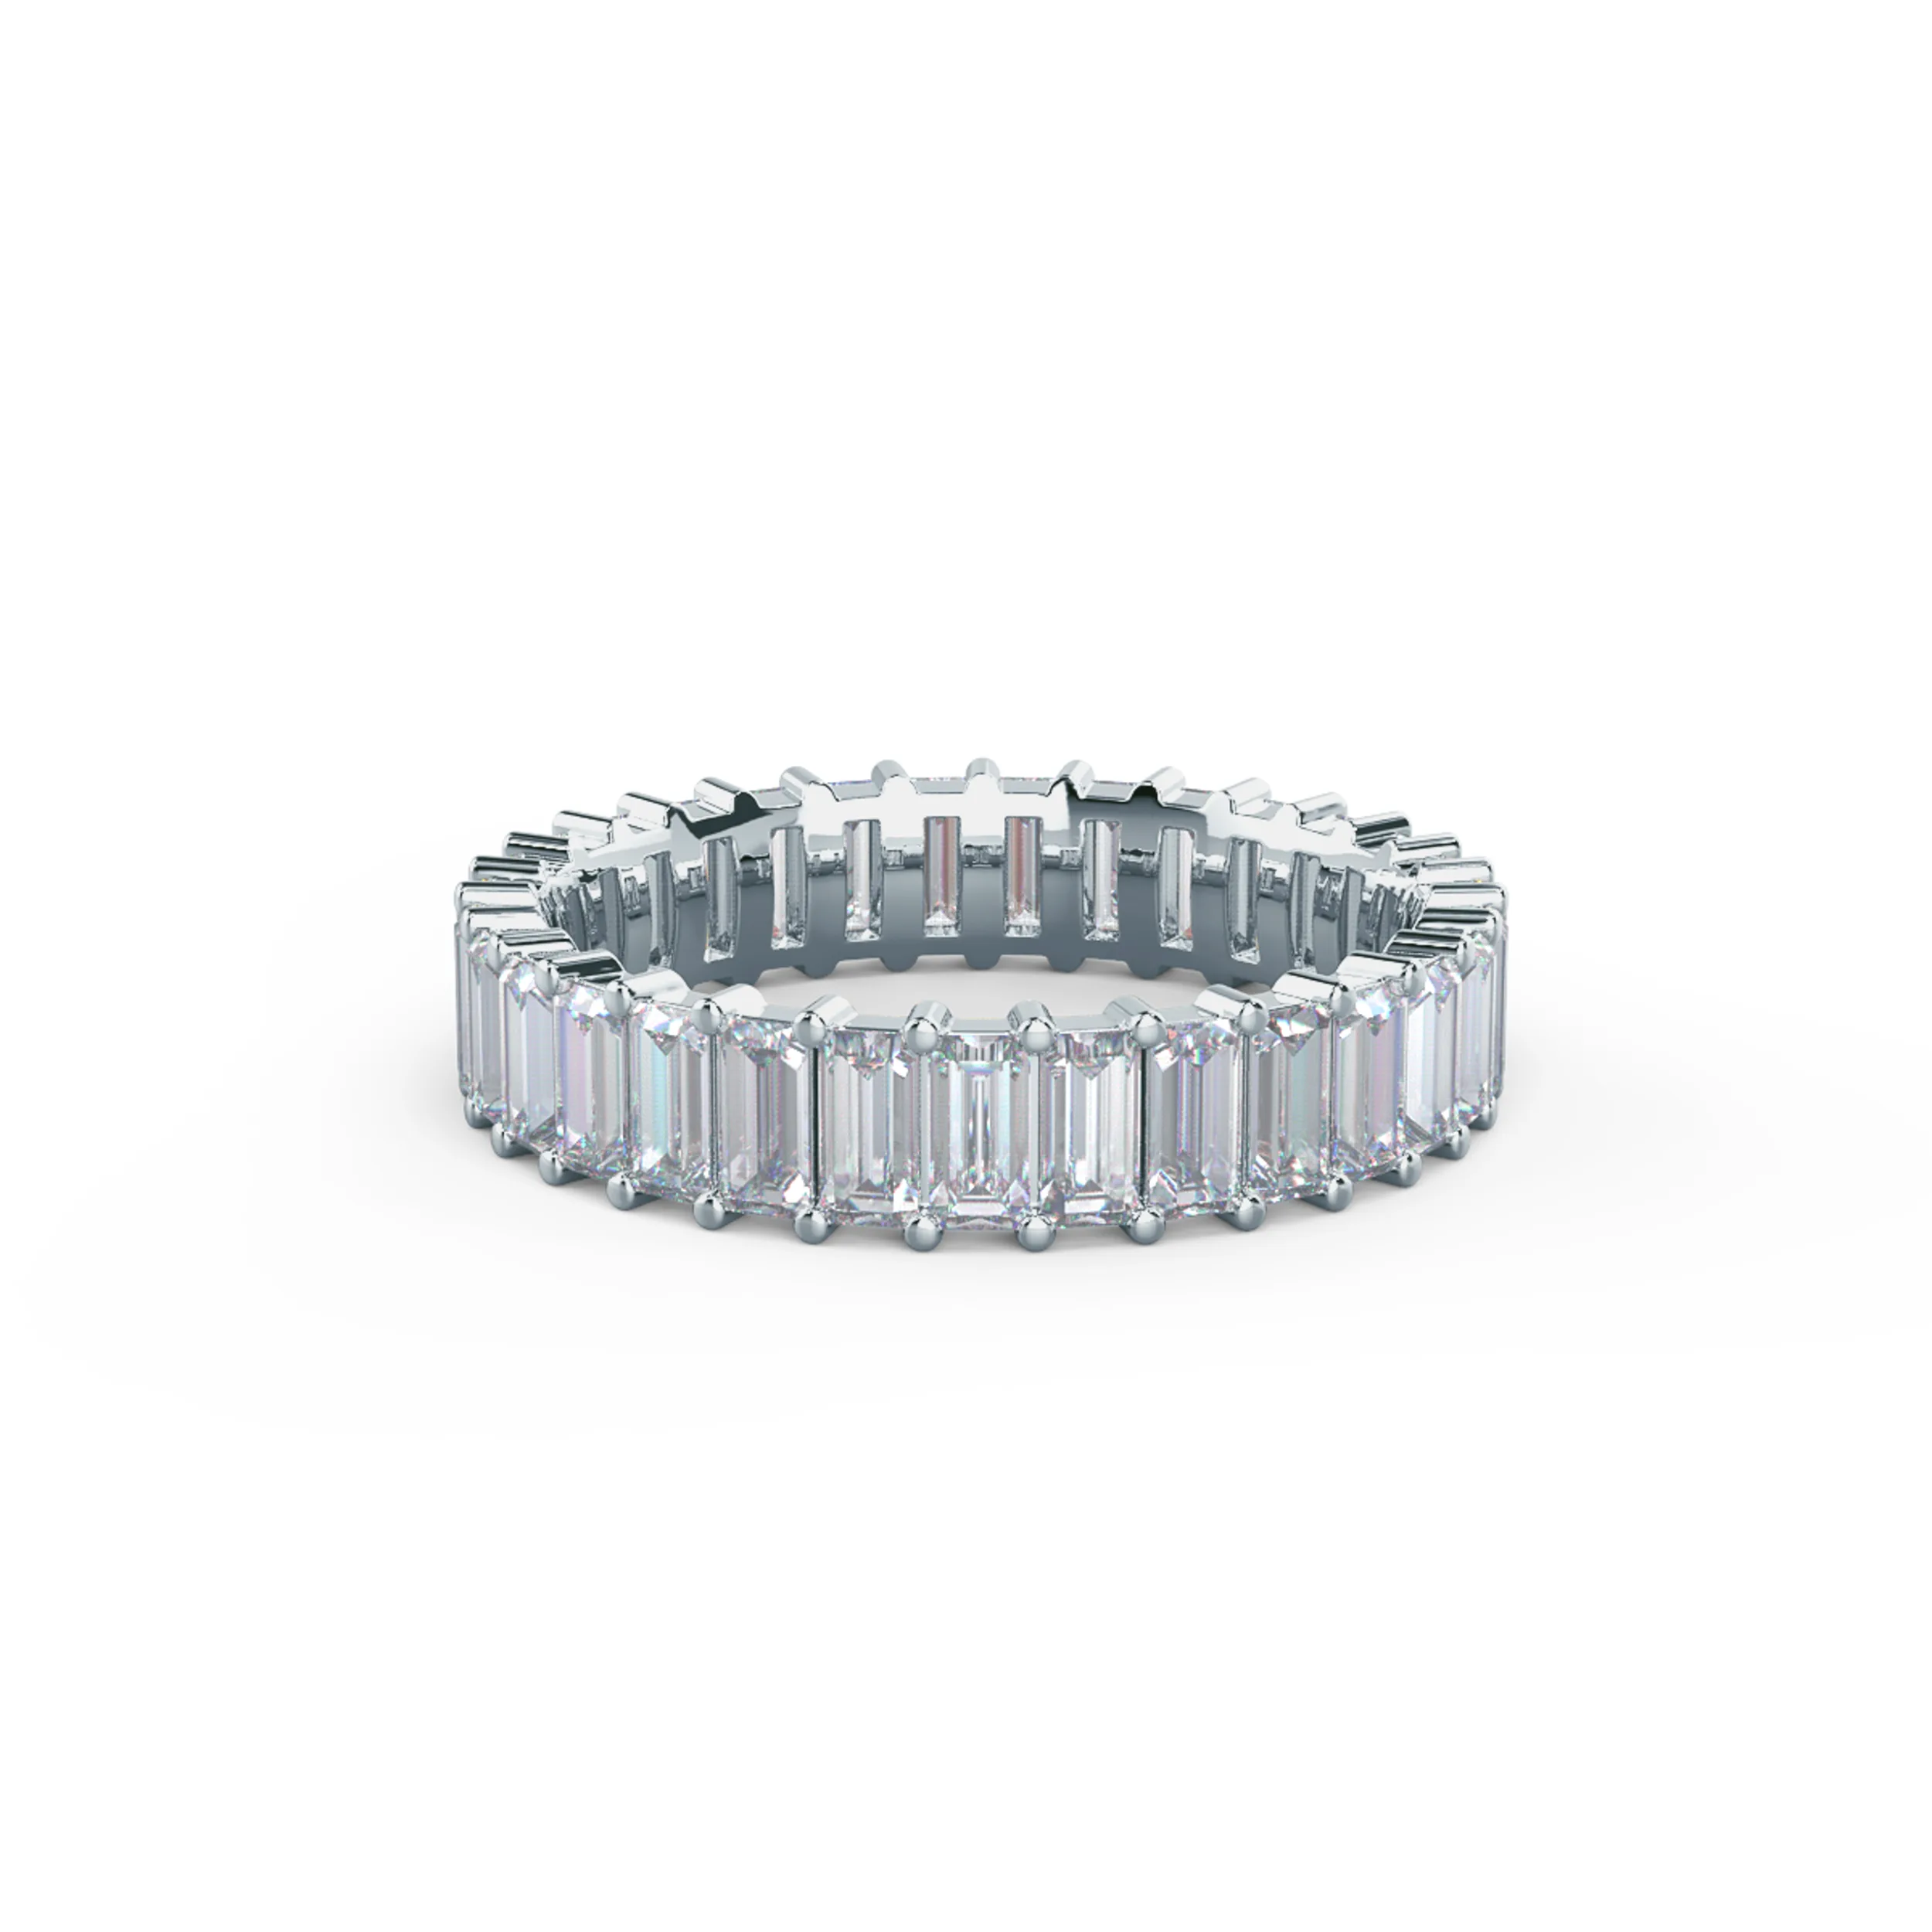 2.8 ct Diamonds Baguette Eternity Band in 18k White Gold (Main View)